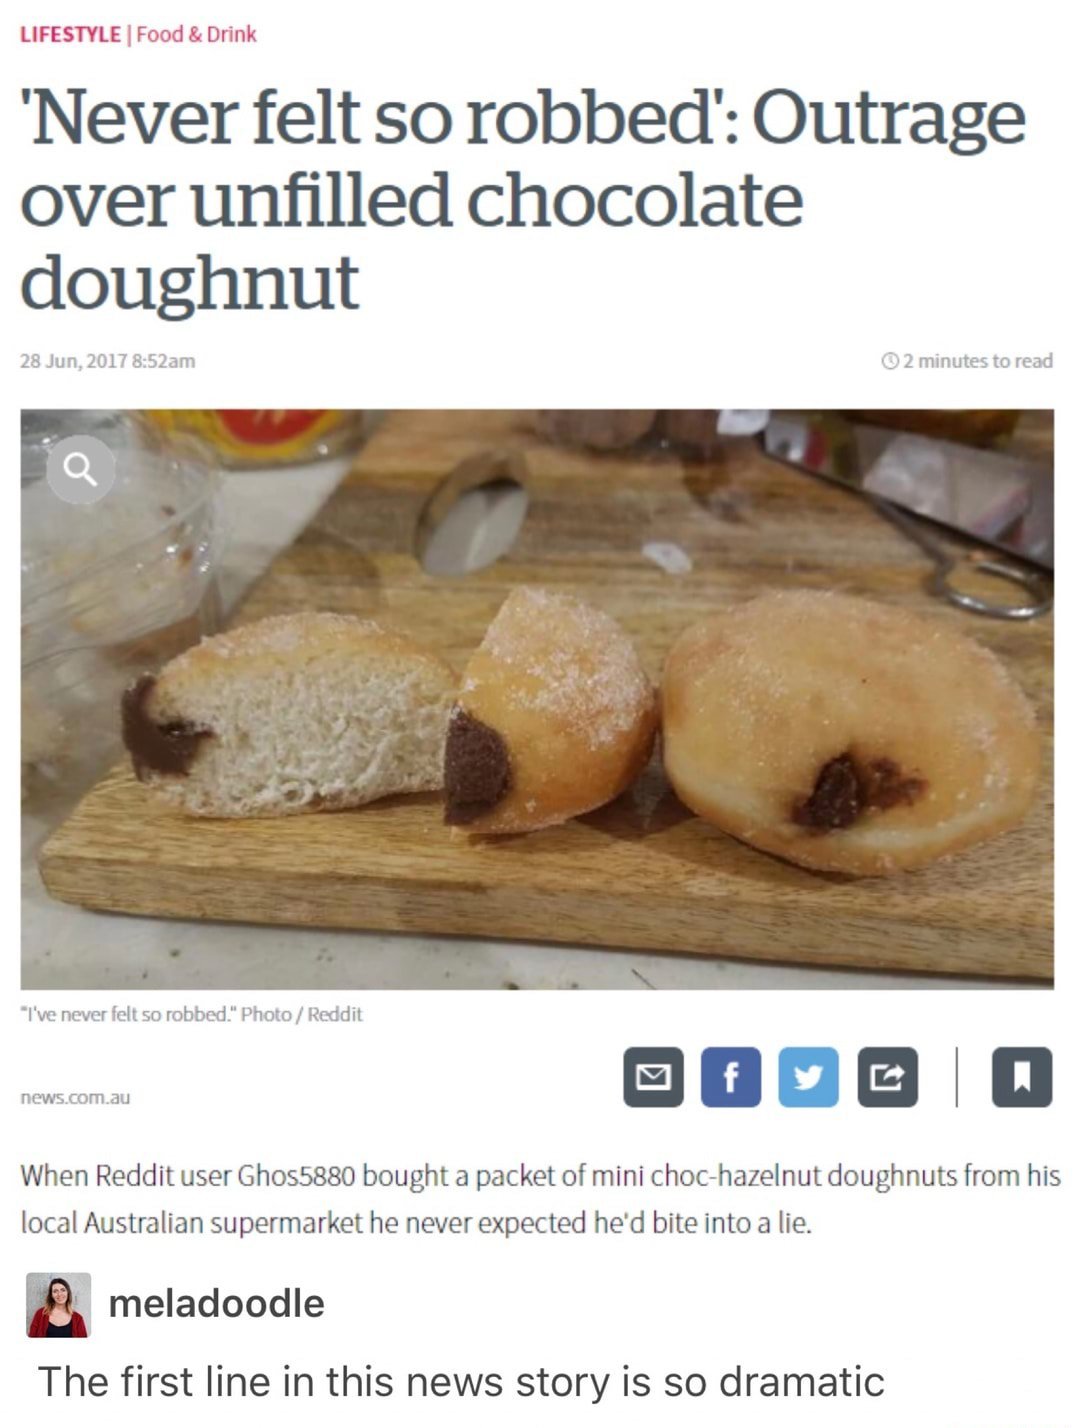 tumblr - imgur meme dump - Lifestyle | Food & Drink 'Never felt so robbed' Outrage over unfilled chocolate doughnut am 2 minutes to read "I've never felt so robbed." Photo Reddit Oooo O news.com.au When Reddit user Ghos5880 bought a packet of mini chochaz